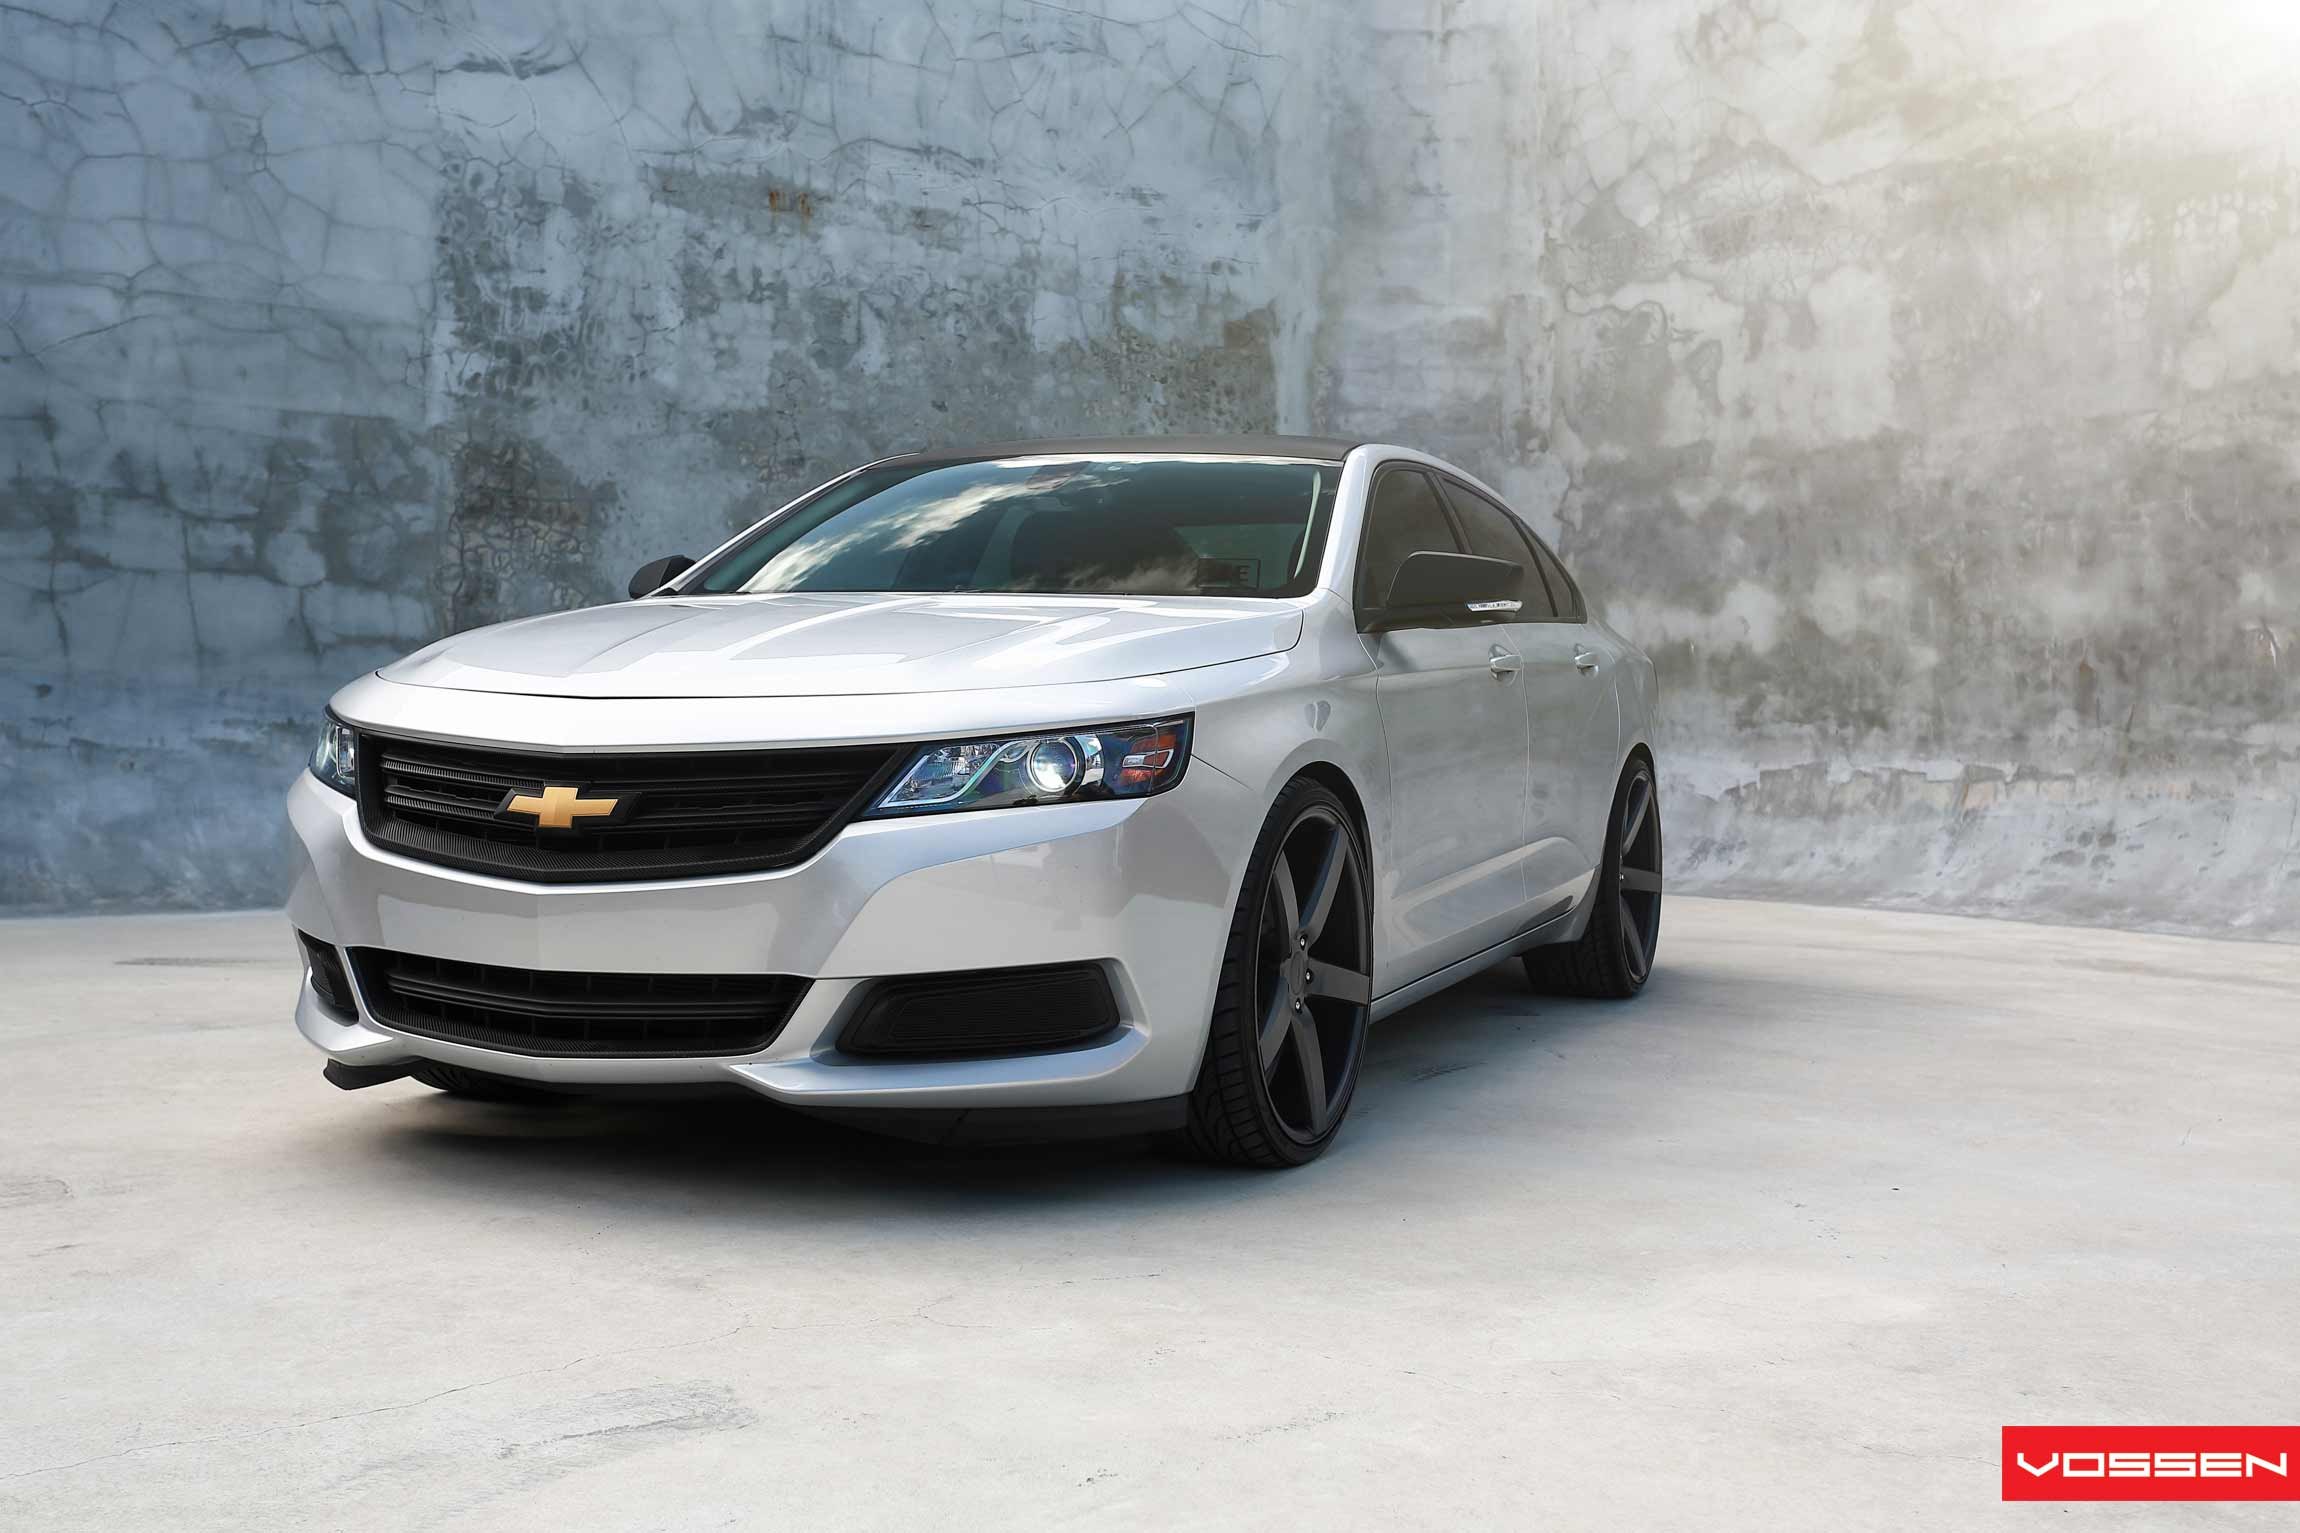 Silver Chevy Impala with Carbon Fiber Grille - Photo by Vossen